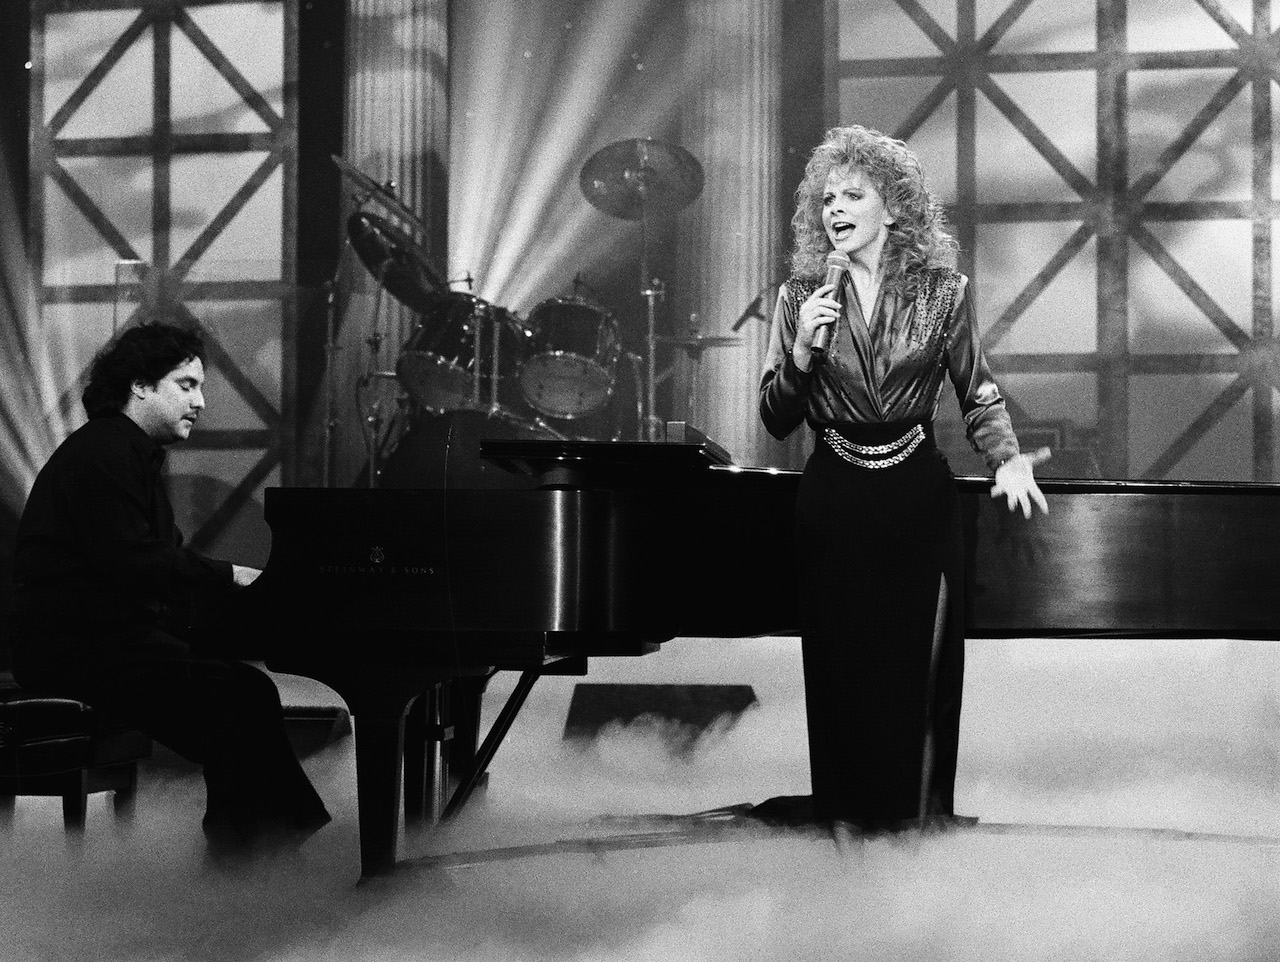 Reba McEntire performs on 'The Tonight Show Starring Jay Leno' on December 1, 1992 Reba McEntire performs on 'The Tonight Show Starring Jay Leno' on December 1, 1992